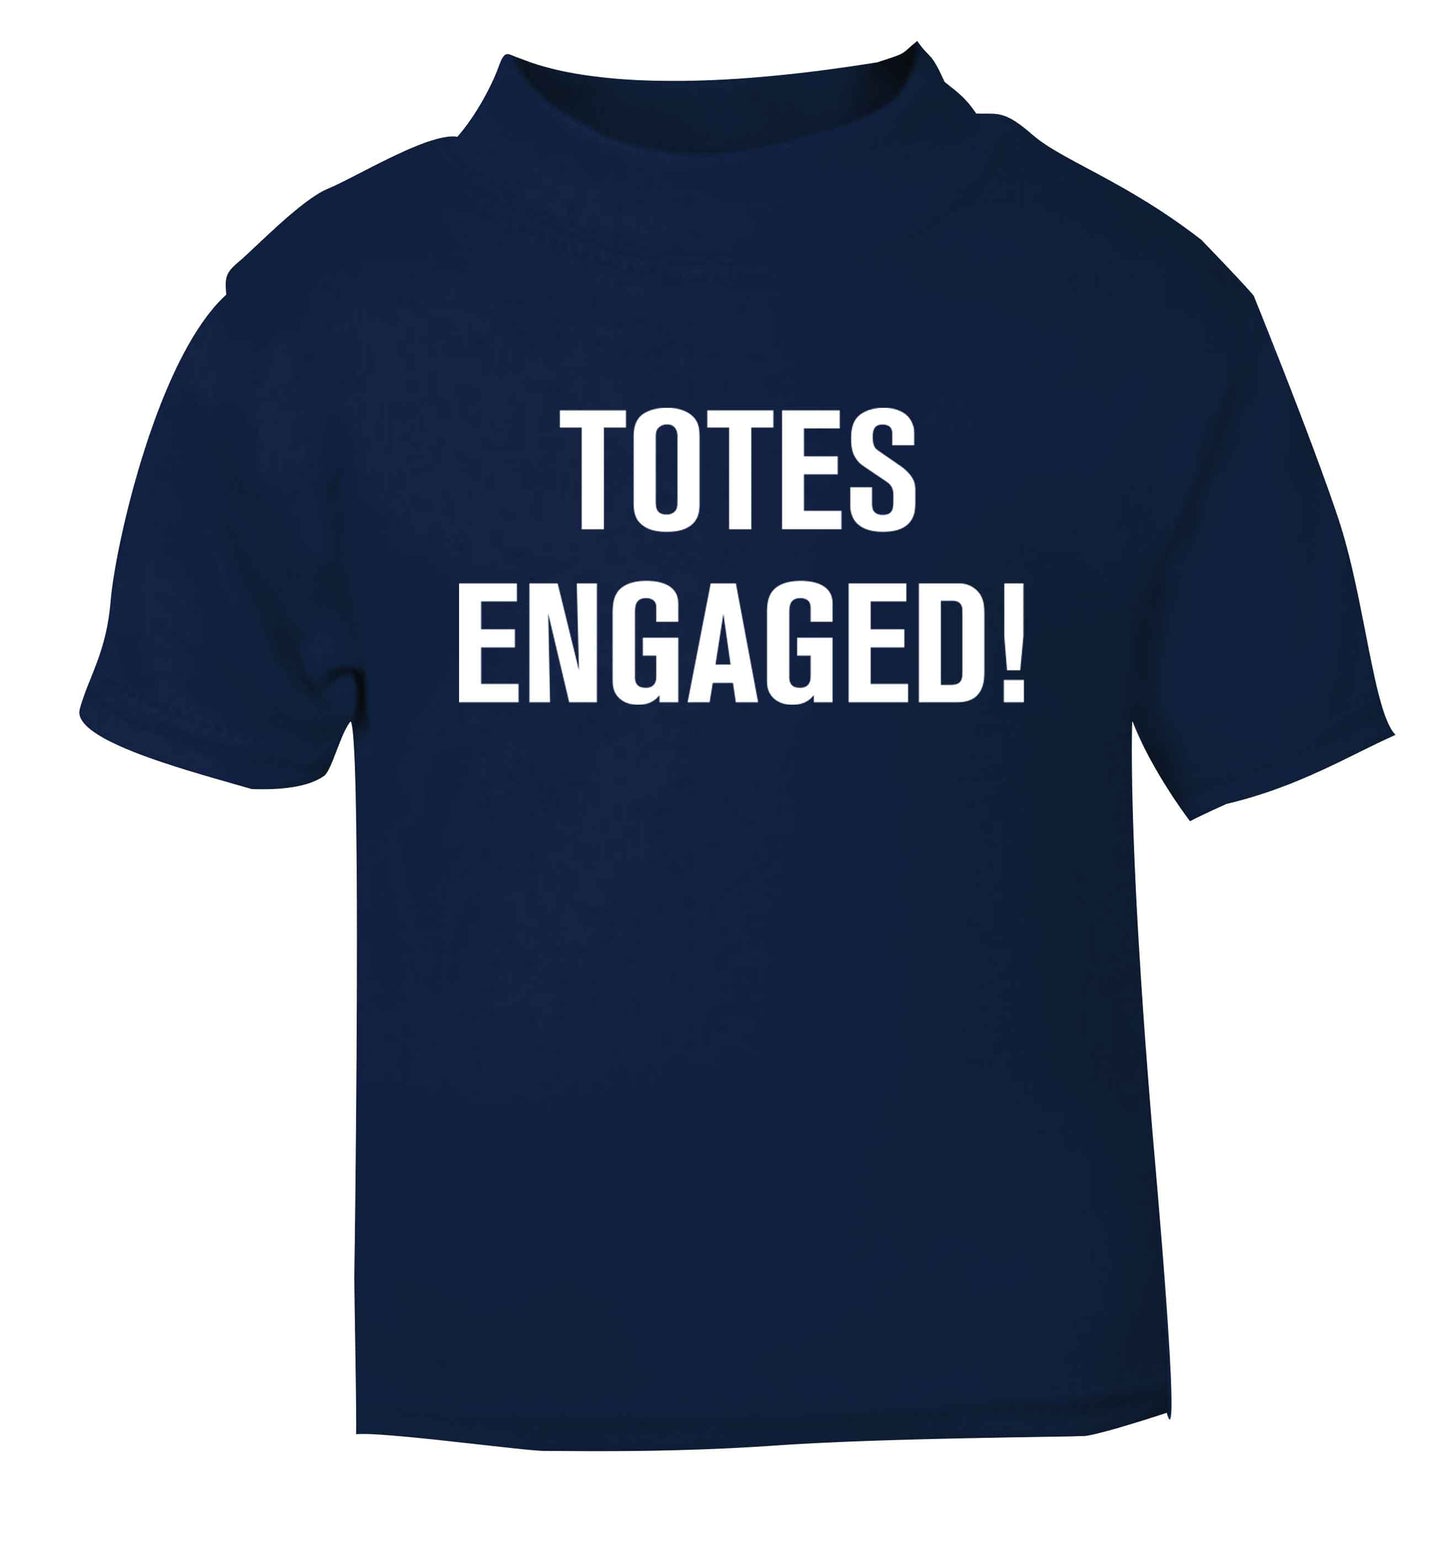 Totes engaged navy baby toddler Tshirt 2 Years